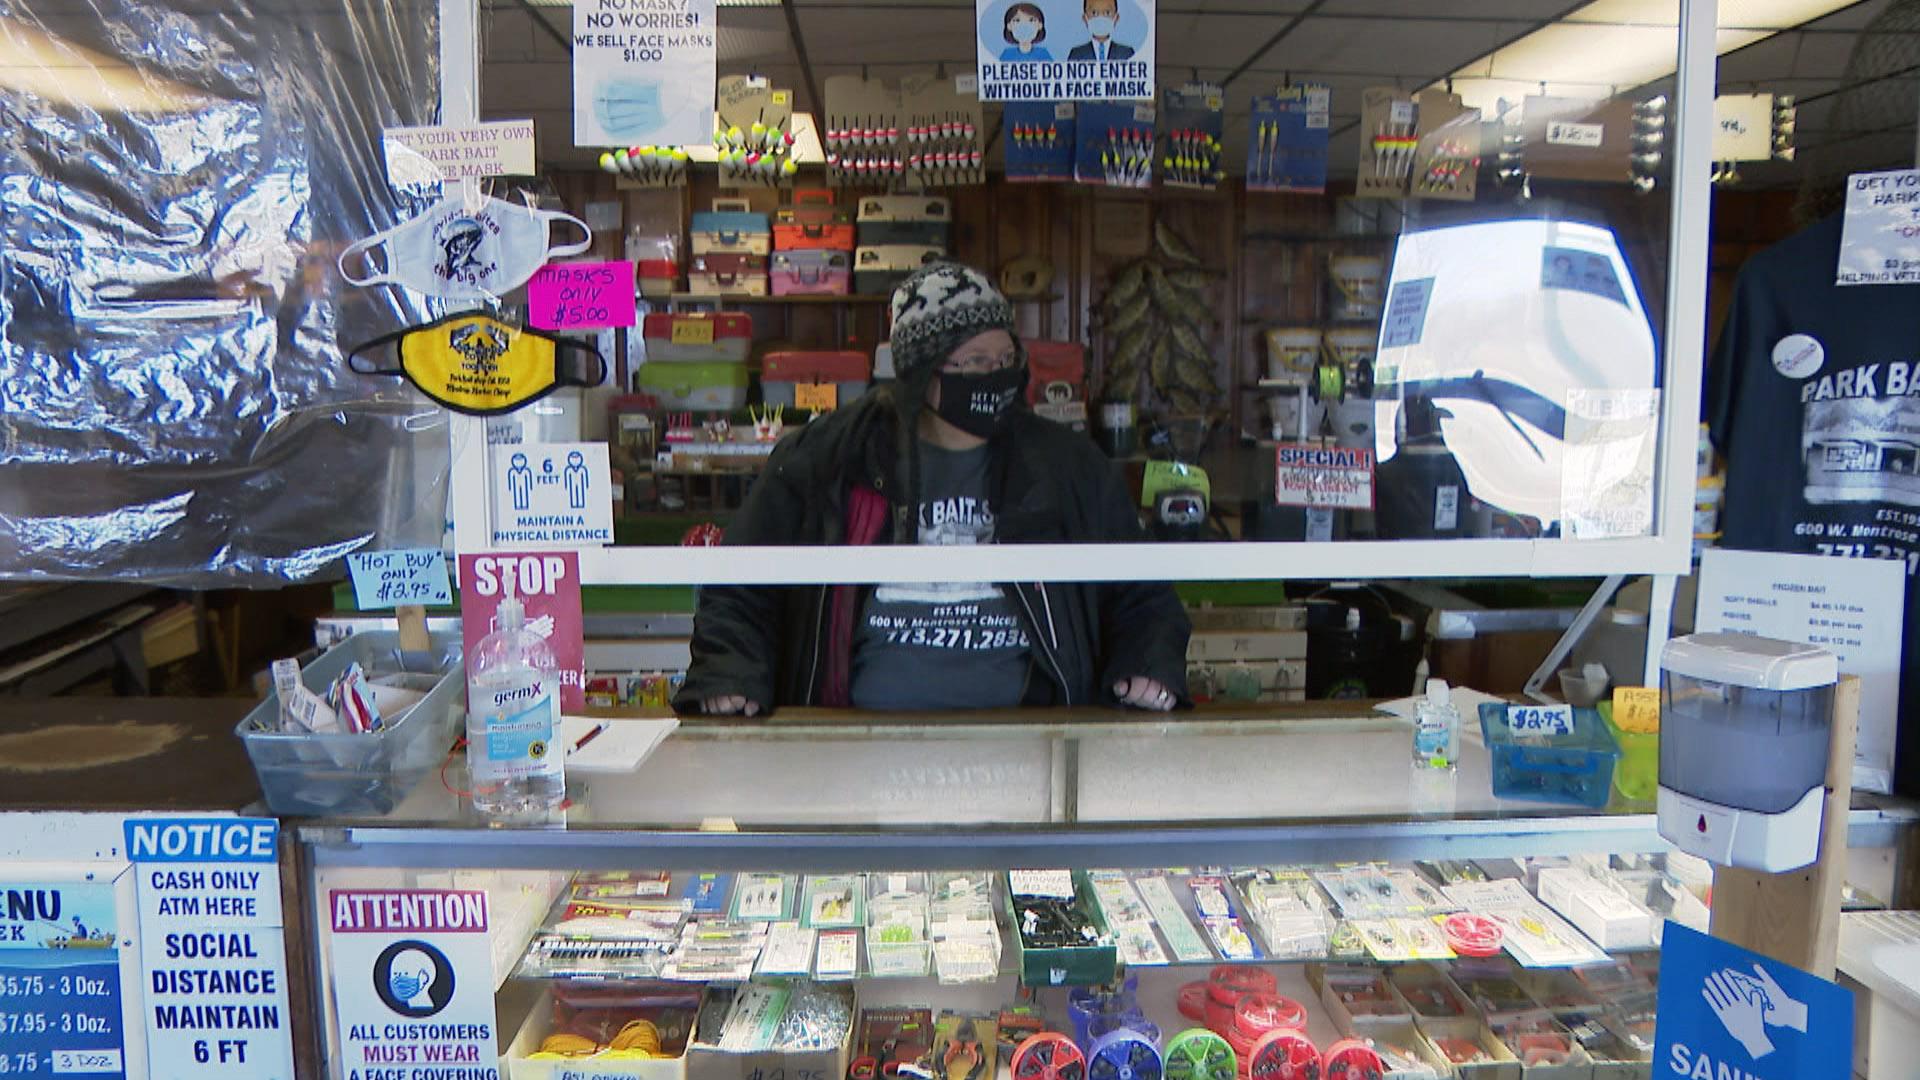 Stacey Greene stands behind the counter of the Park Bait Shop on Mar. 12, 2020. The shop located near Montrose Harbor was opened more than 60 years ago by Greene’s father Willie Greene. (WTTW News)